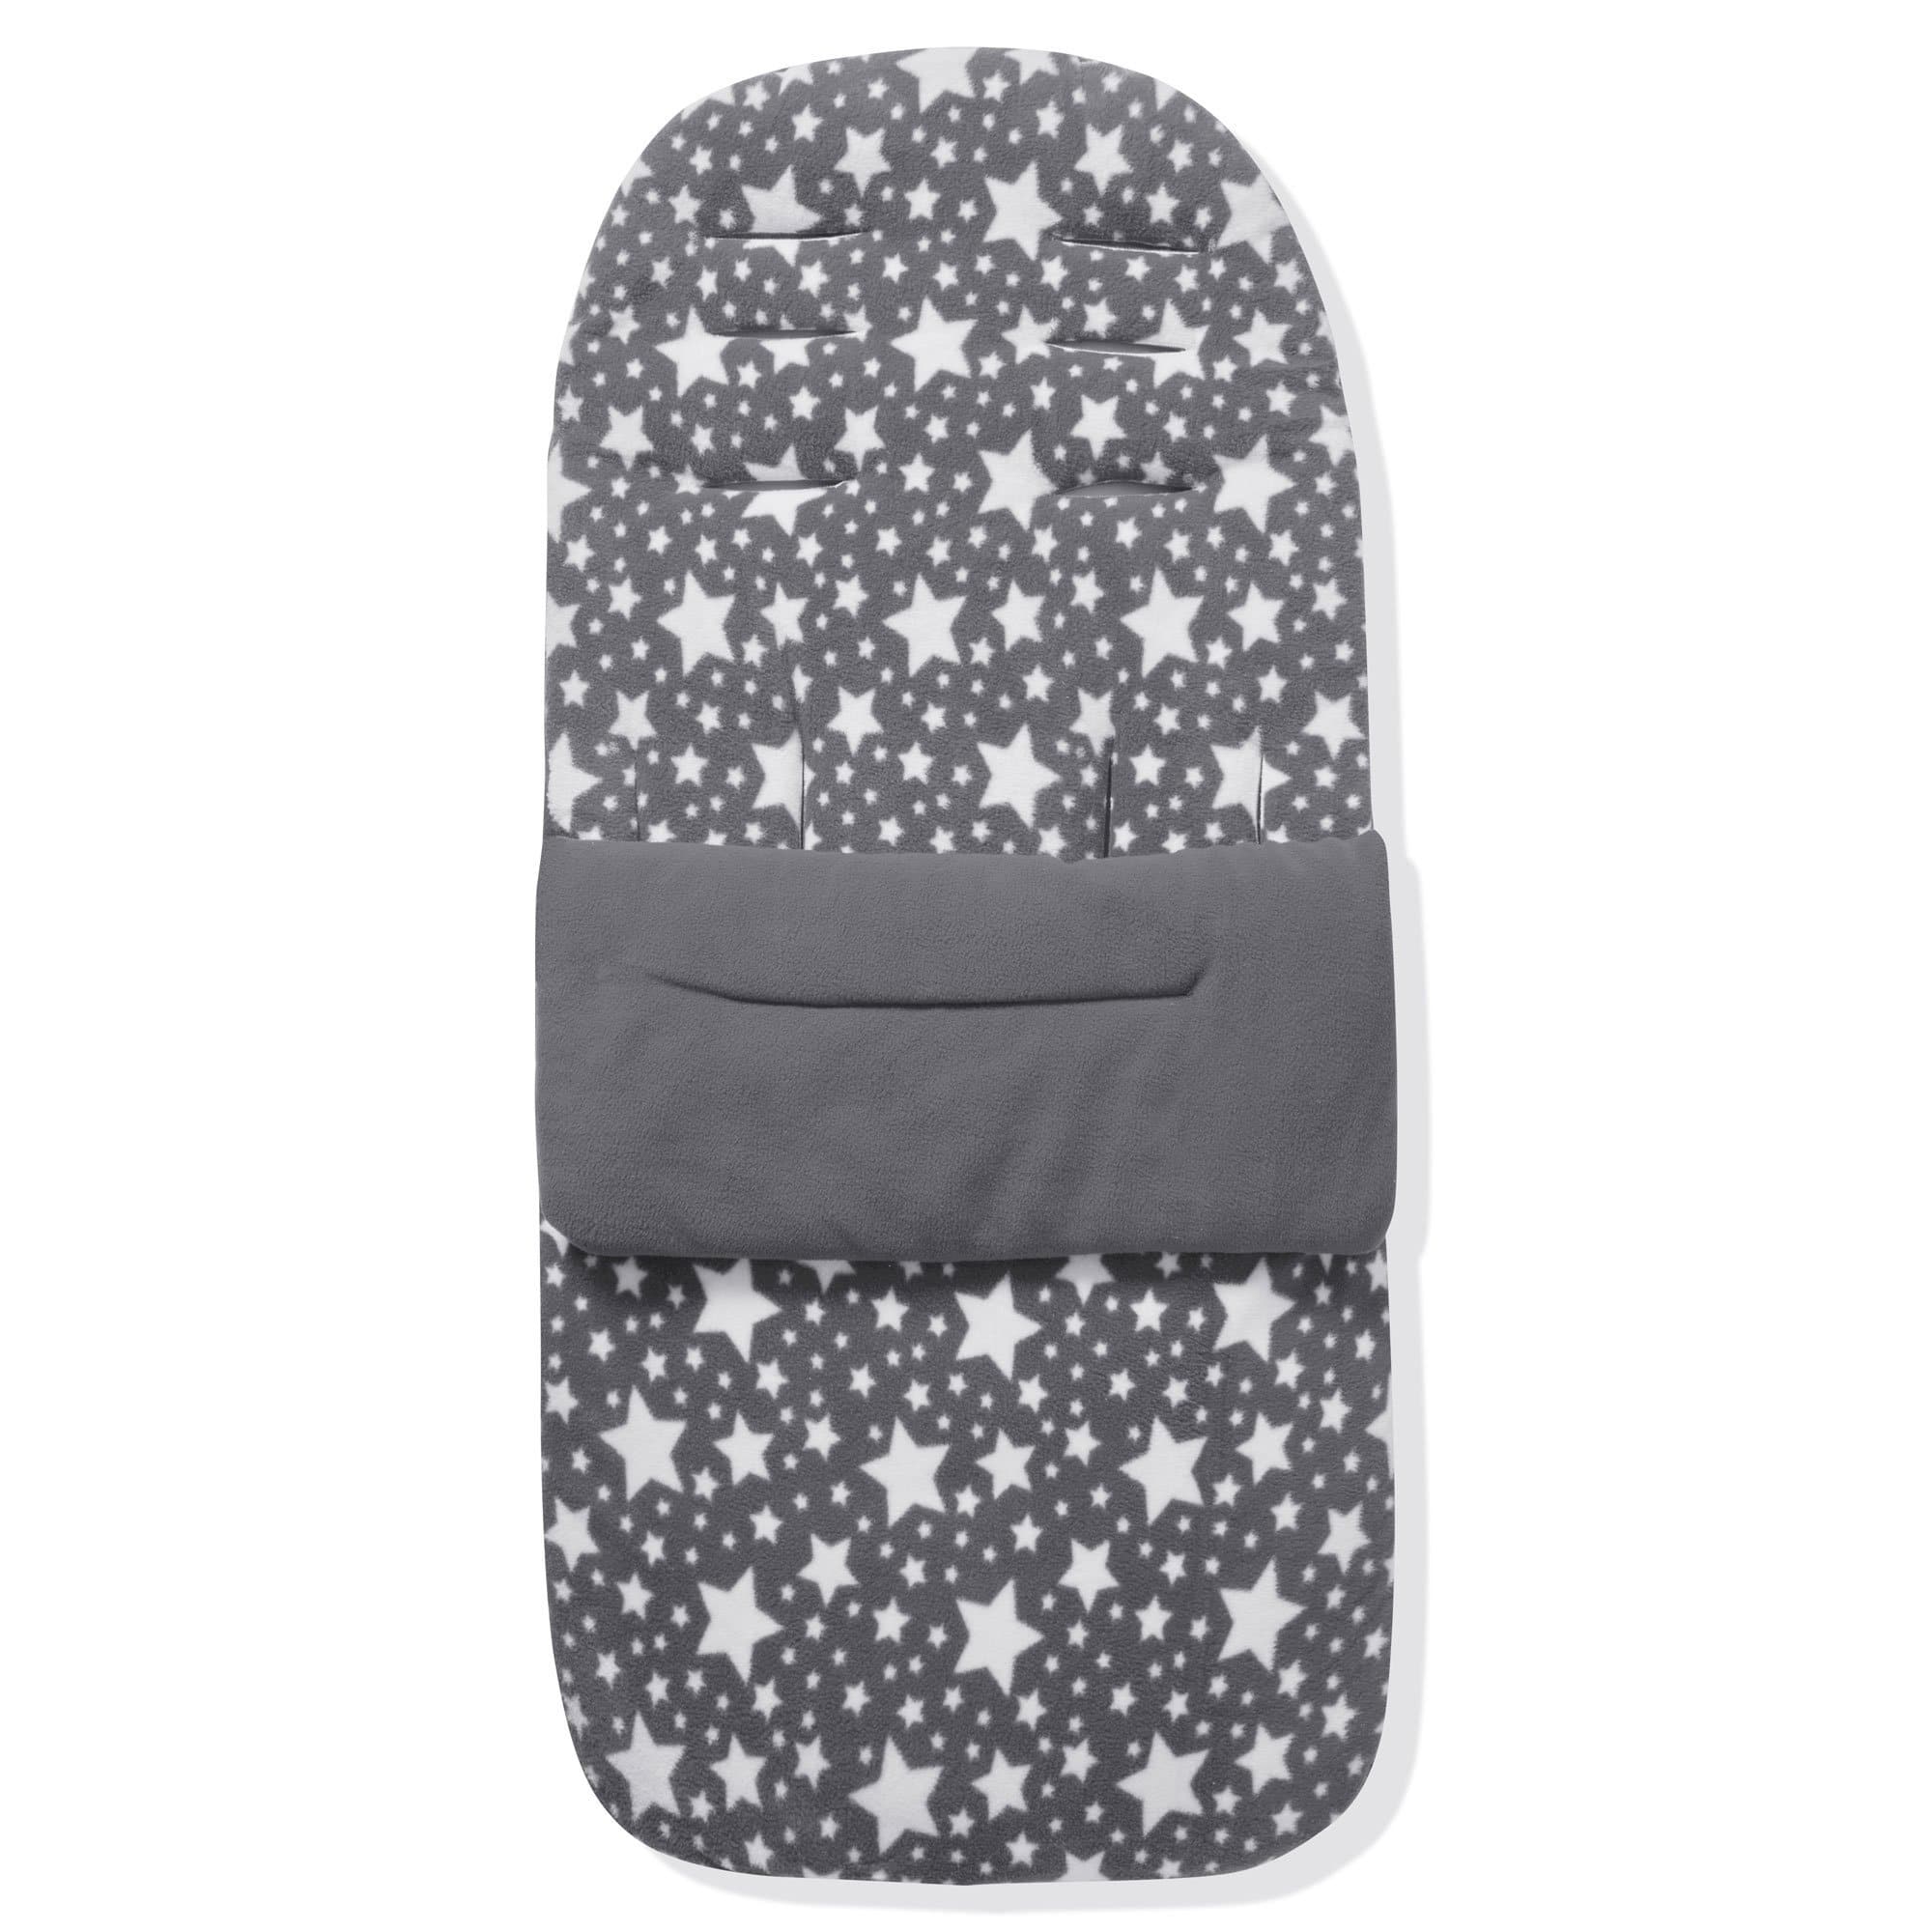 Fleece Footmuff / Cosy Toes Compatible with Zeta - Grey Star / Fits All Models | For Your Little One